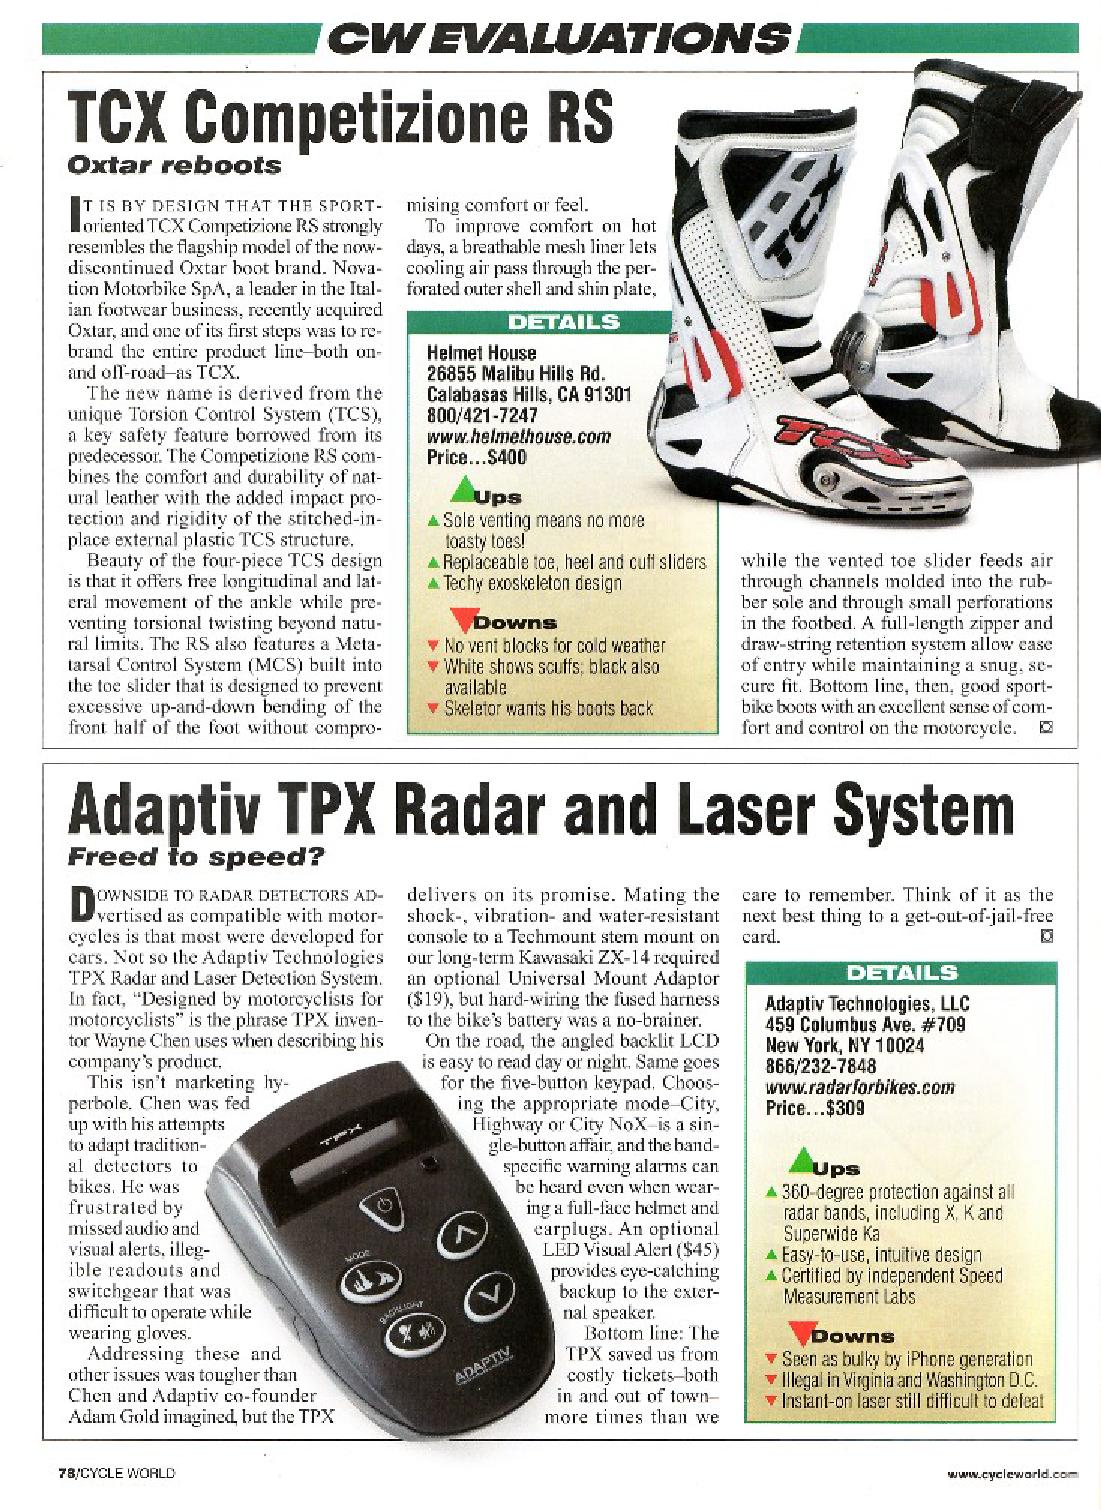 CycleWorld Magazine October 2008 - page 1